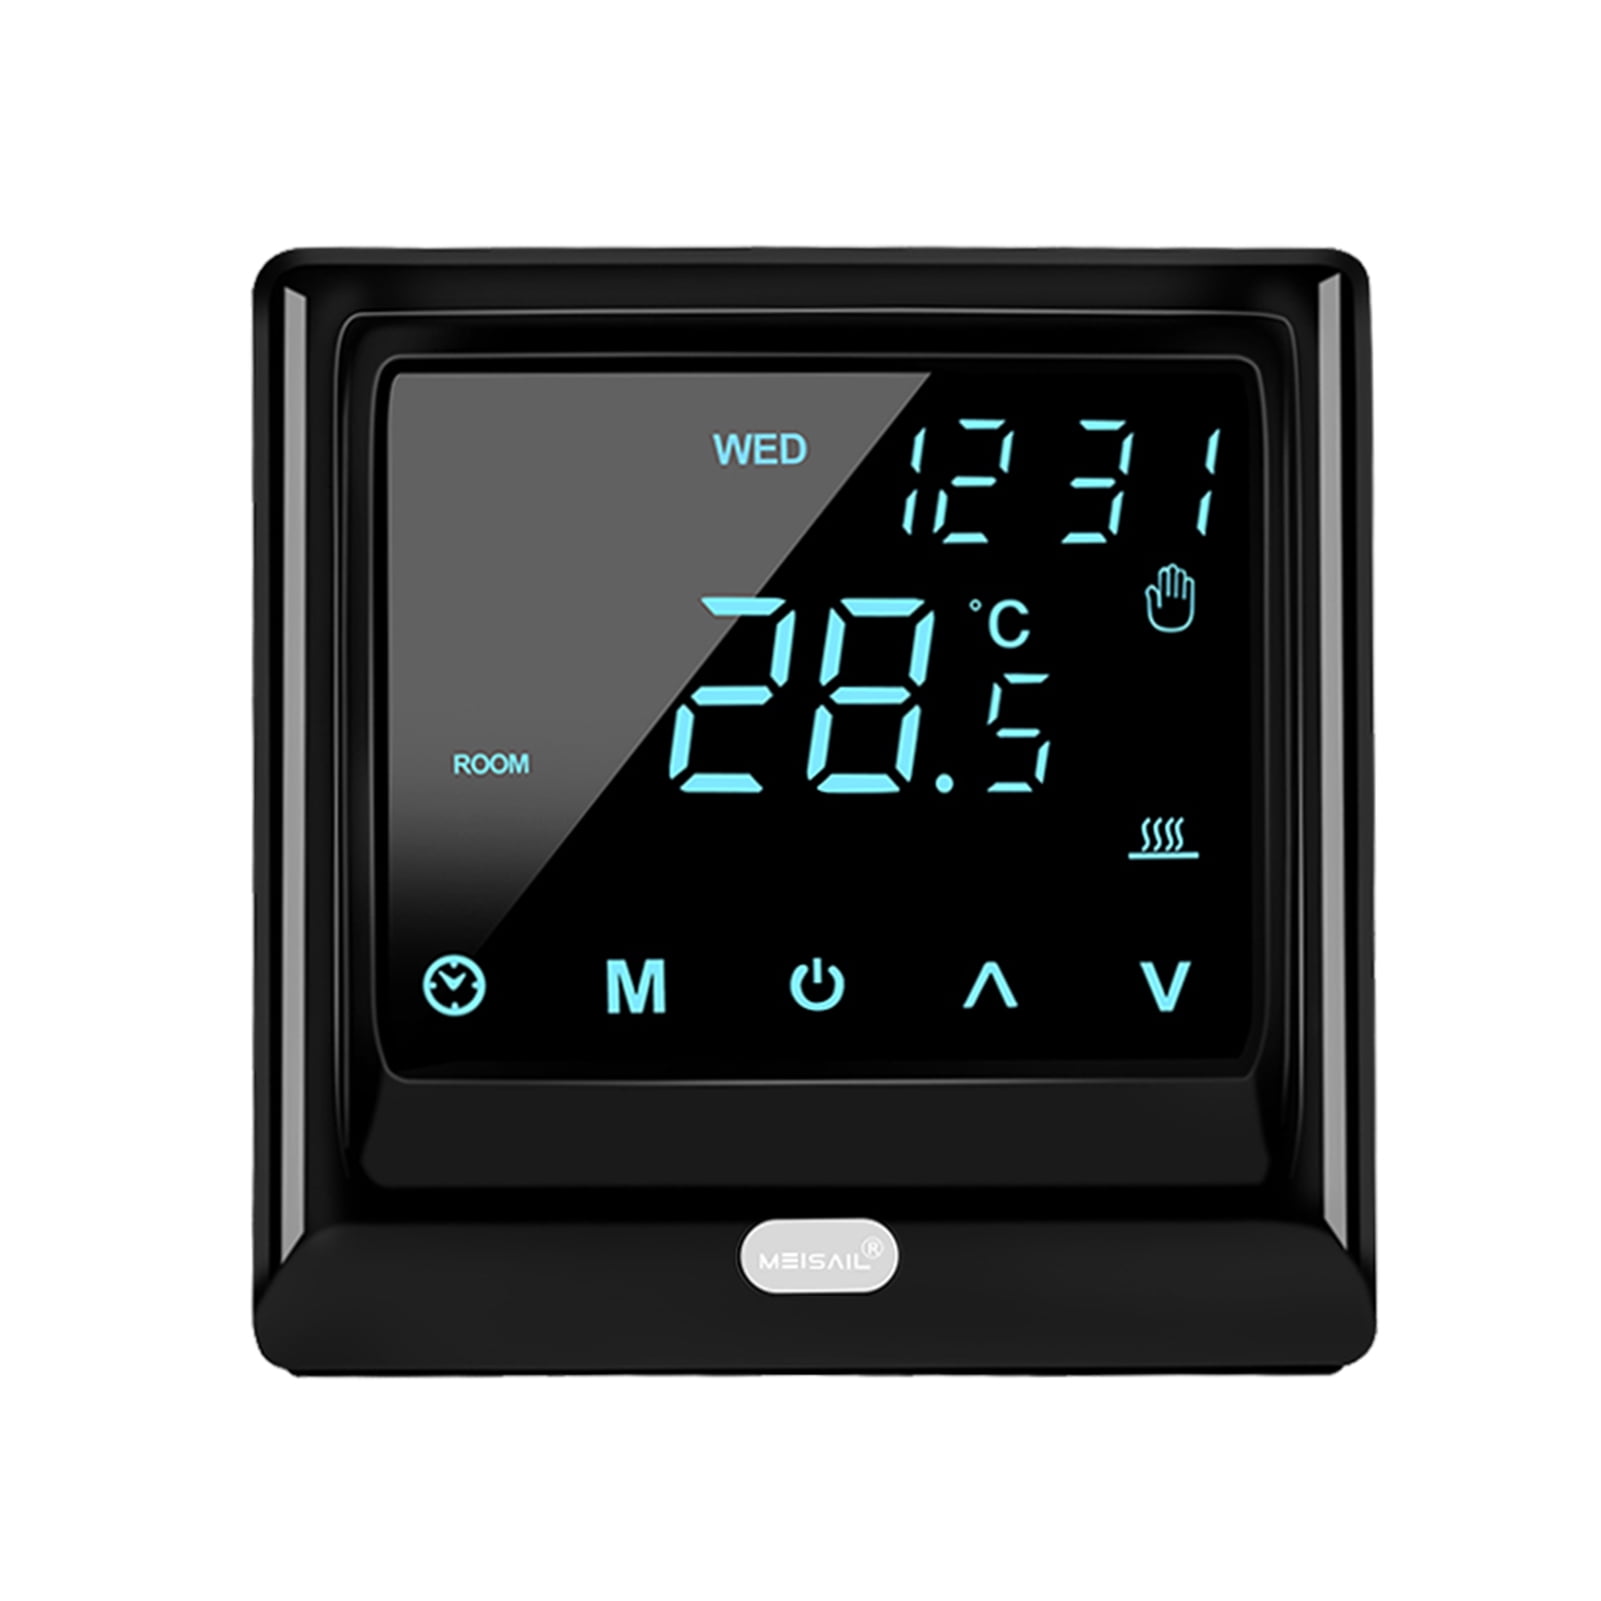 Touch Screen floor Heating Programmable Thermostat Room Temperature Controler 